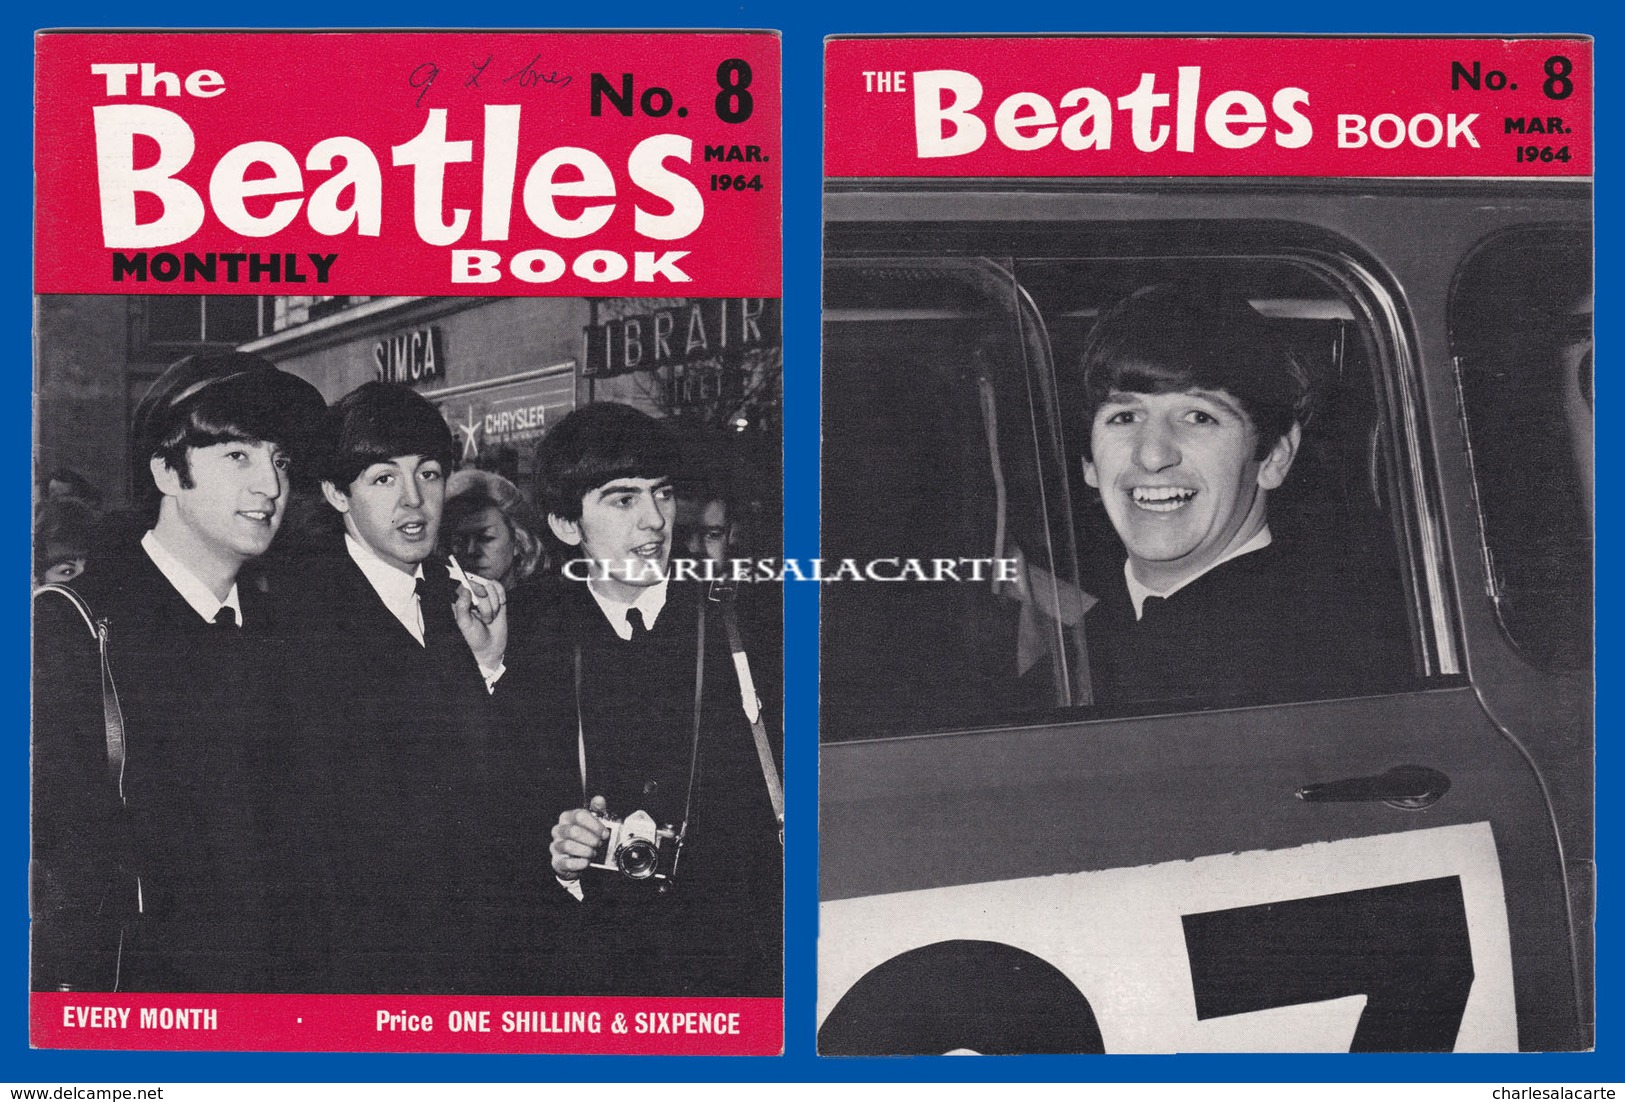 1964 MARCH THE BEATLES MONTHLY BOOK No.8 AUTHENTIC SUBERB CONDITION SEE THE SCAN - Divertissement